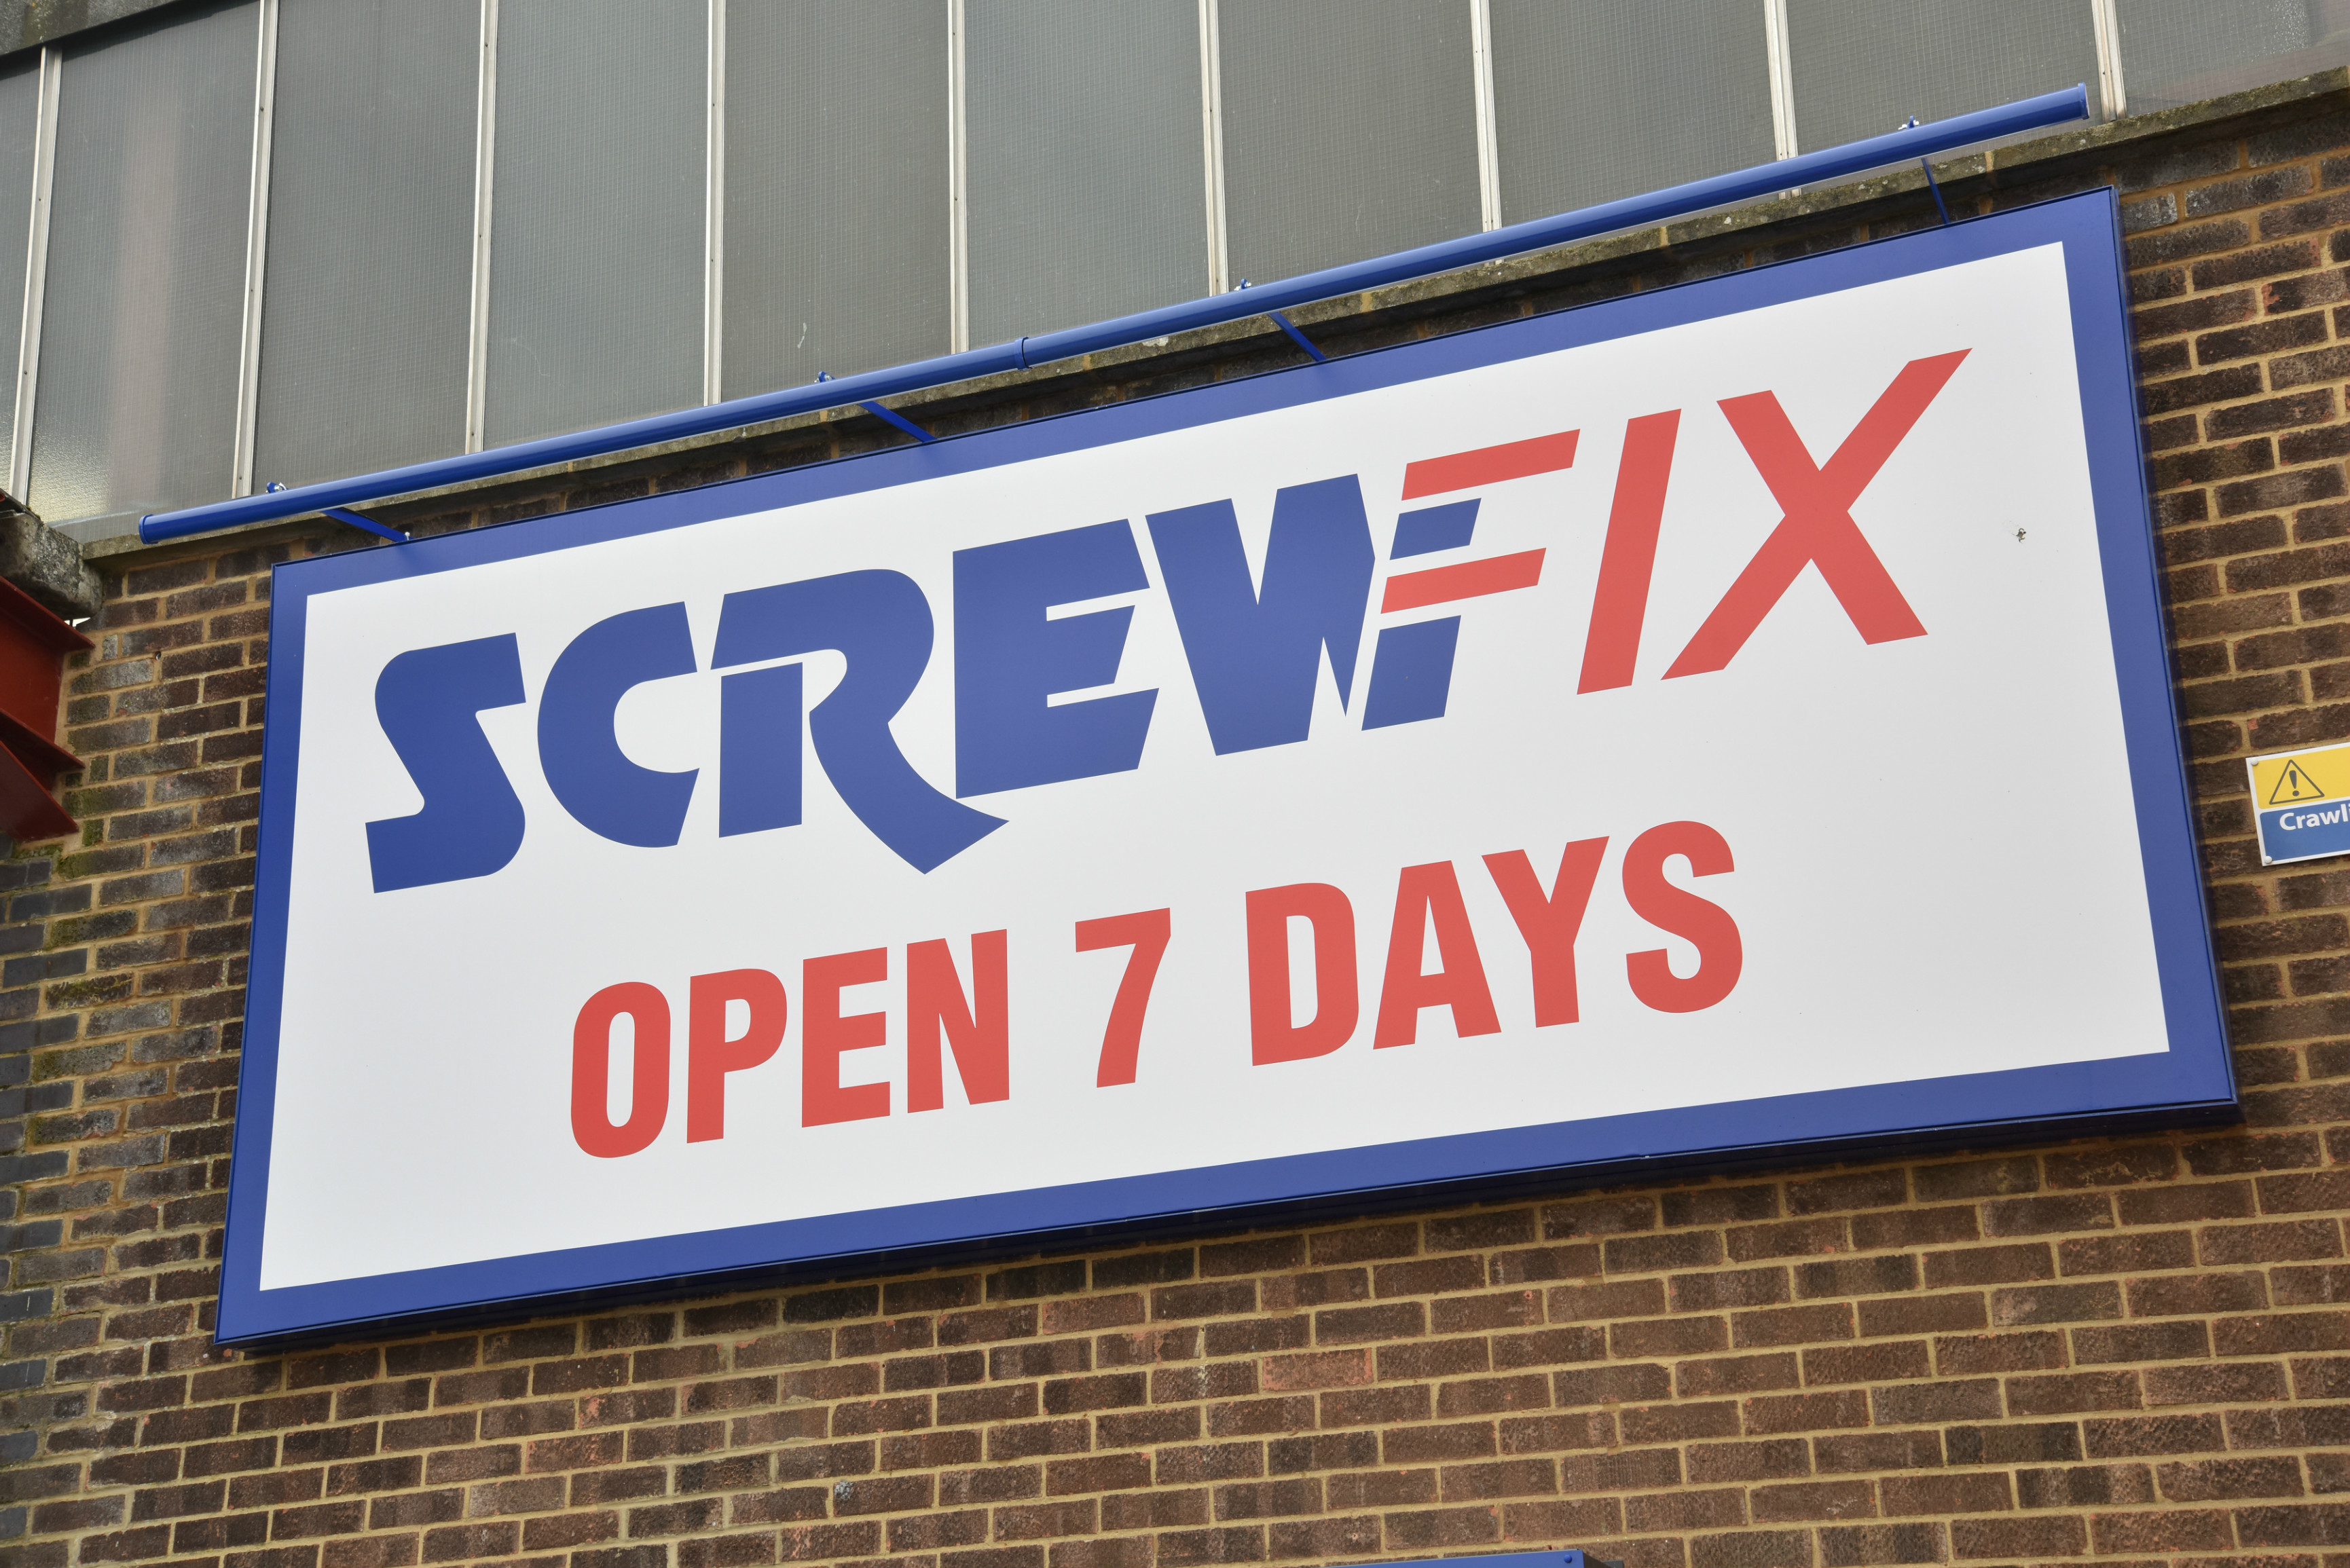 Jobs boost for Pontypool as new Screwfix store opens